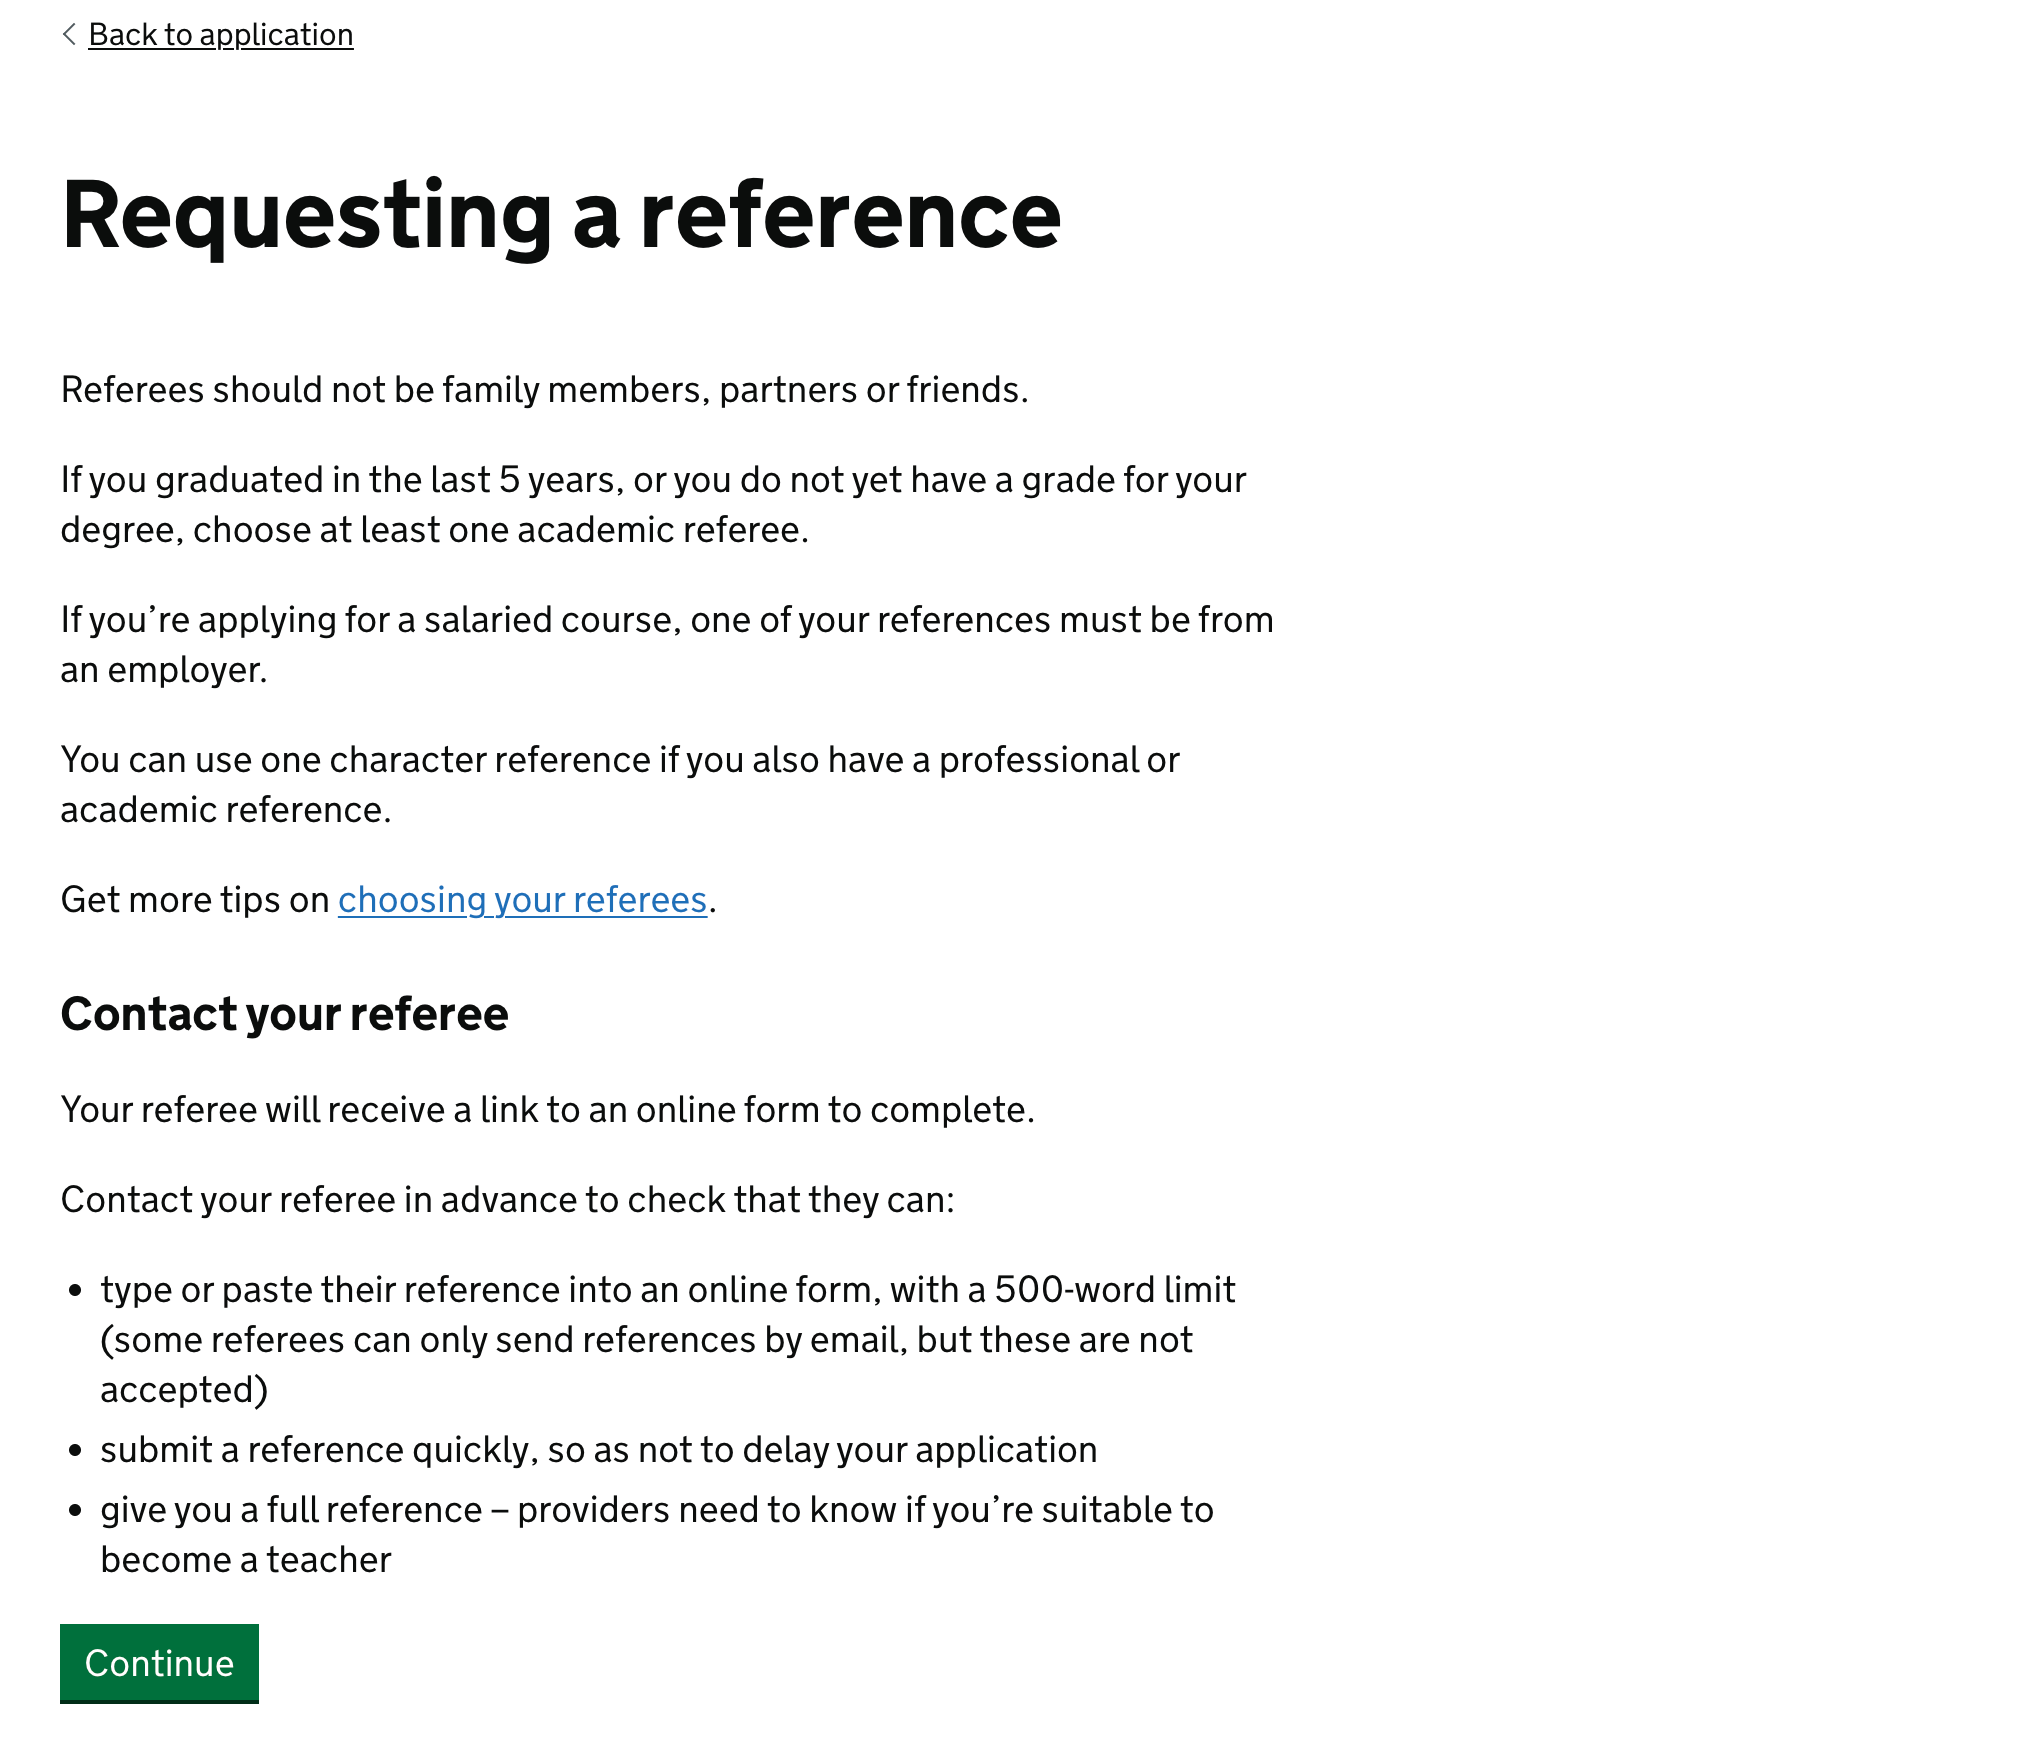 Screenshot showing text: Requesting a reference. Referees should not be family members, partners or friends. If you graduated in the last 5 years, or you do not yet have a grade for your degree, choose at least one academic referee. If you’re applying for a salaried course, one of your references must be from an employer. You can use one character reference if you also have a professional or academic reference. Get more tips on [choosing your referees]. Contact your referee: Your referee will receive a link to an online form to complete. Contact your referee in advance to check that they can: type or paste their reference into an online form, with a 500-word limit (some referees can only send references by email, but these are not accepted), submit a reference quickly, so as not to delay your application, give you a full reference – providers need to know if you’re suitable to become a teacher